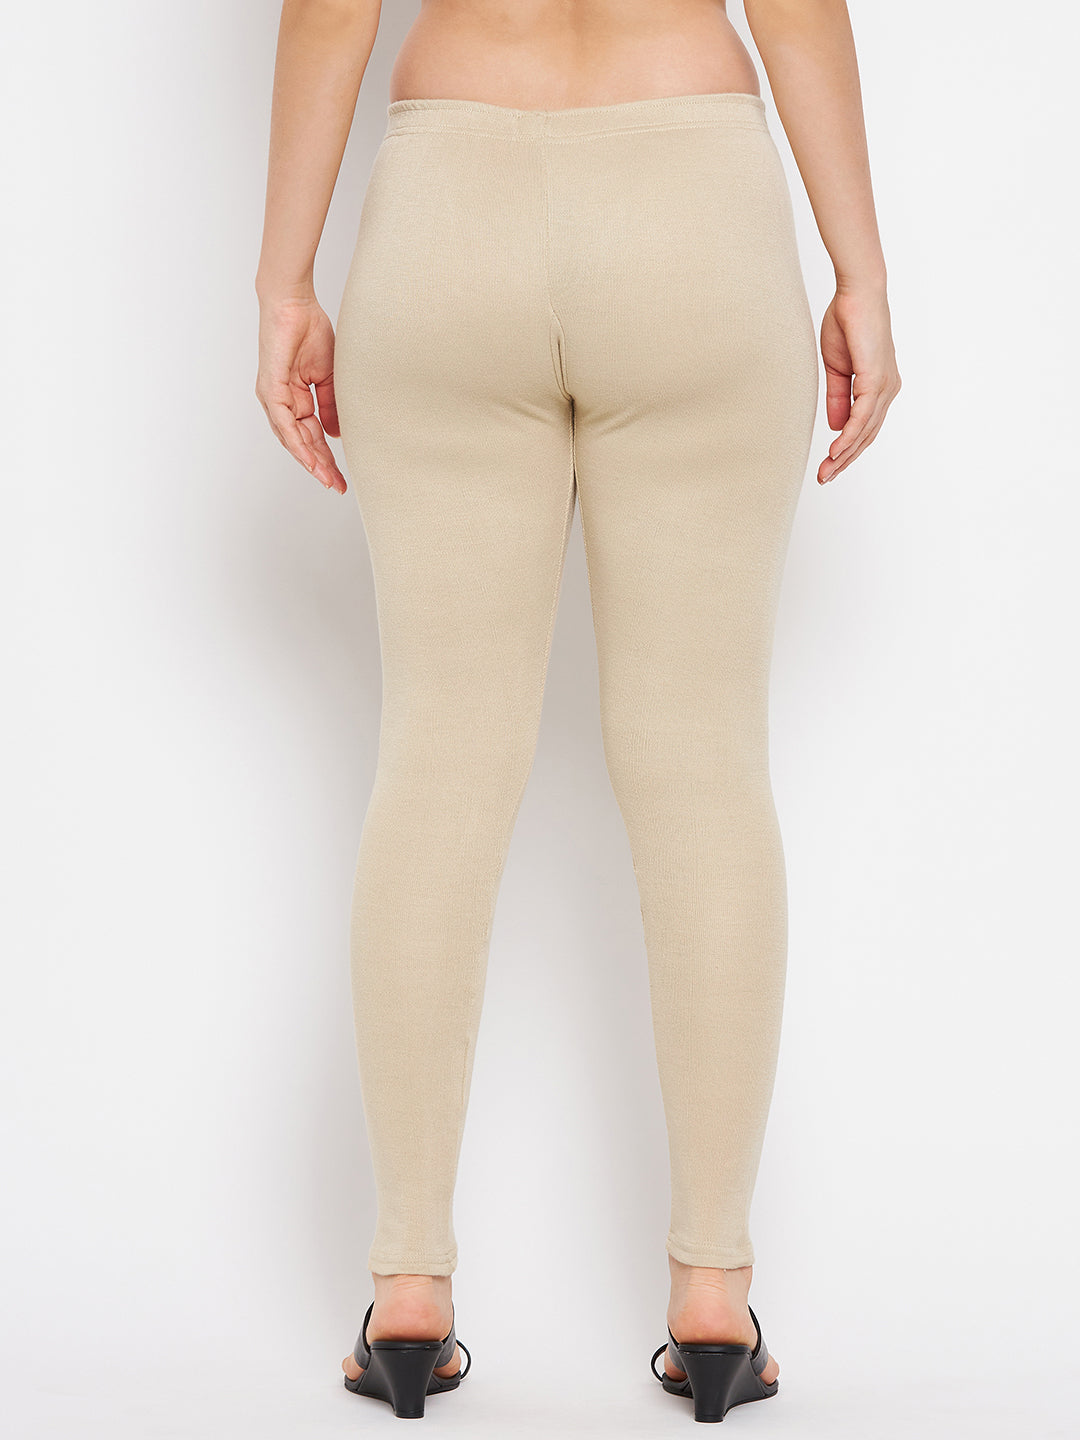 Clora White & Light Fawn Solid Woolen Leggings (Pack Of 2)